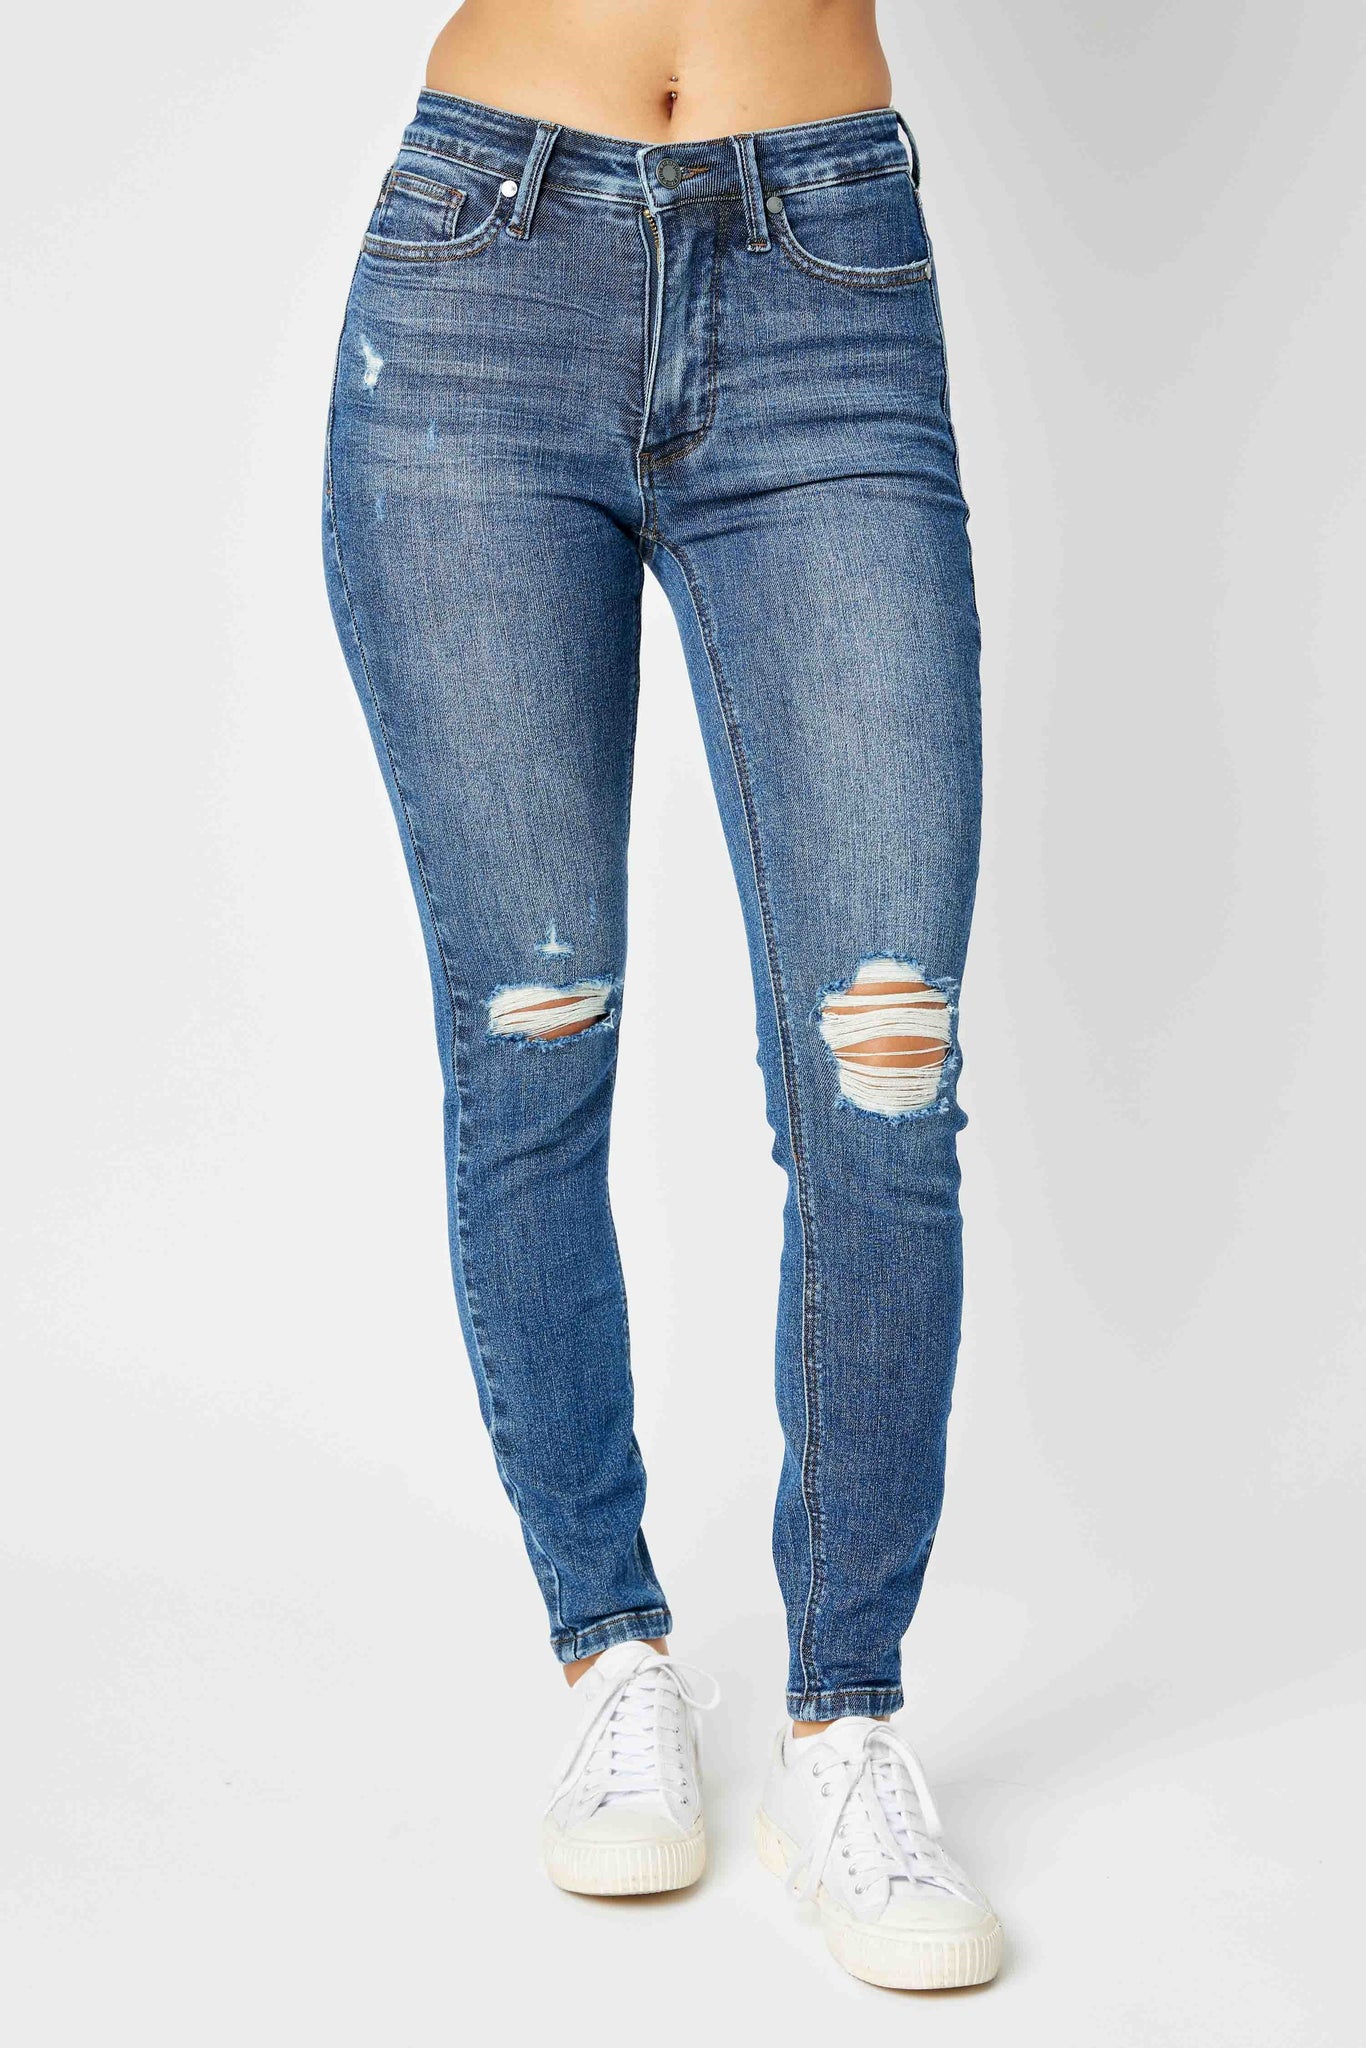 Overachiever Judy Blue Tummy Control Jeans